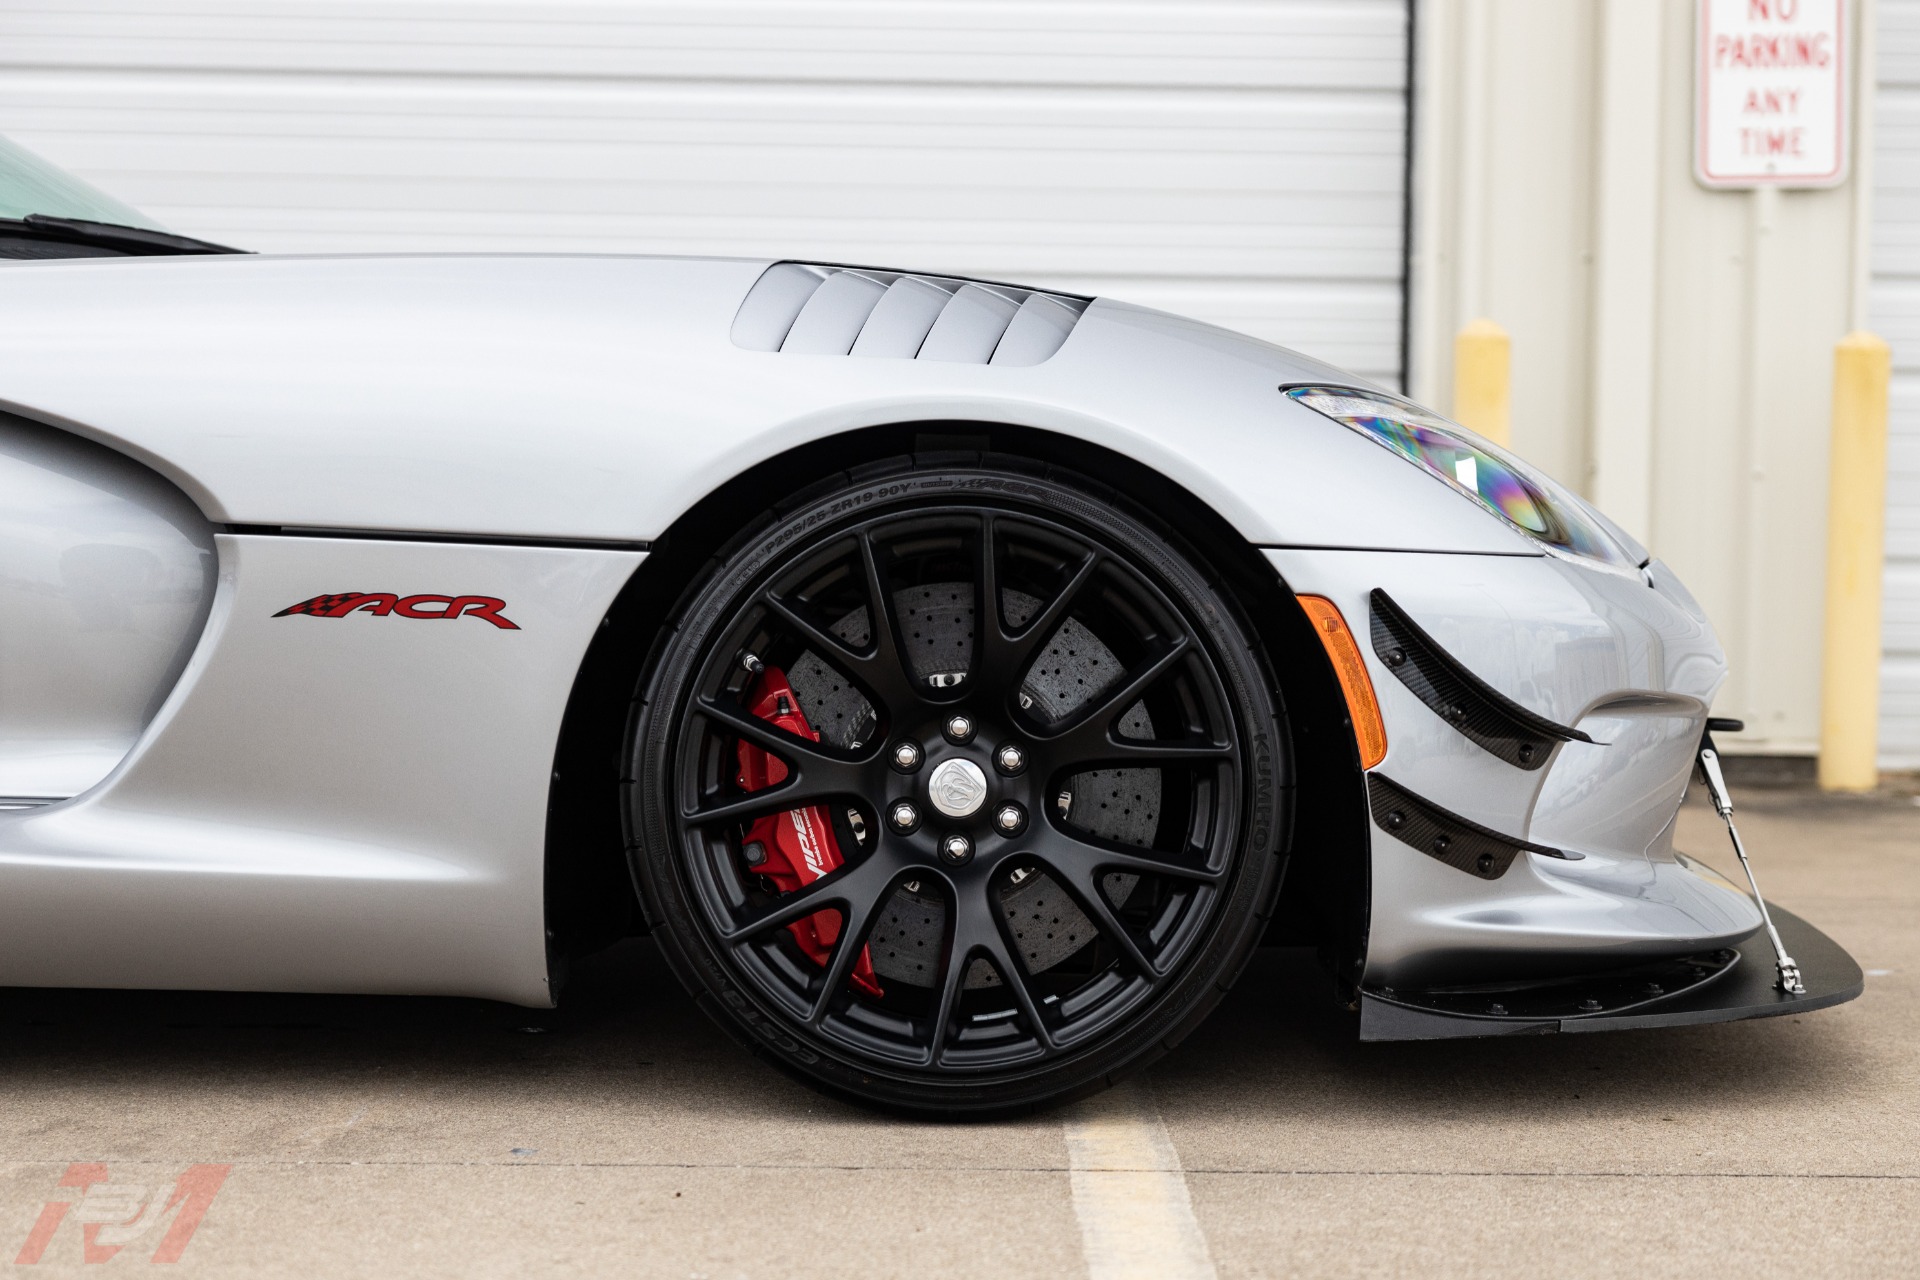 Used-2016-Dodge-Viper-ACR-Extreme